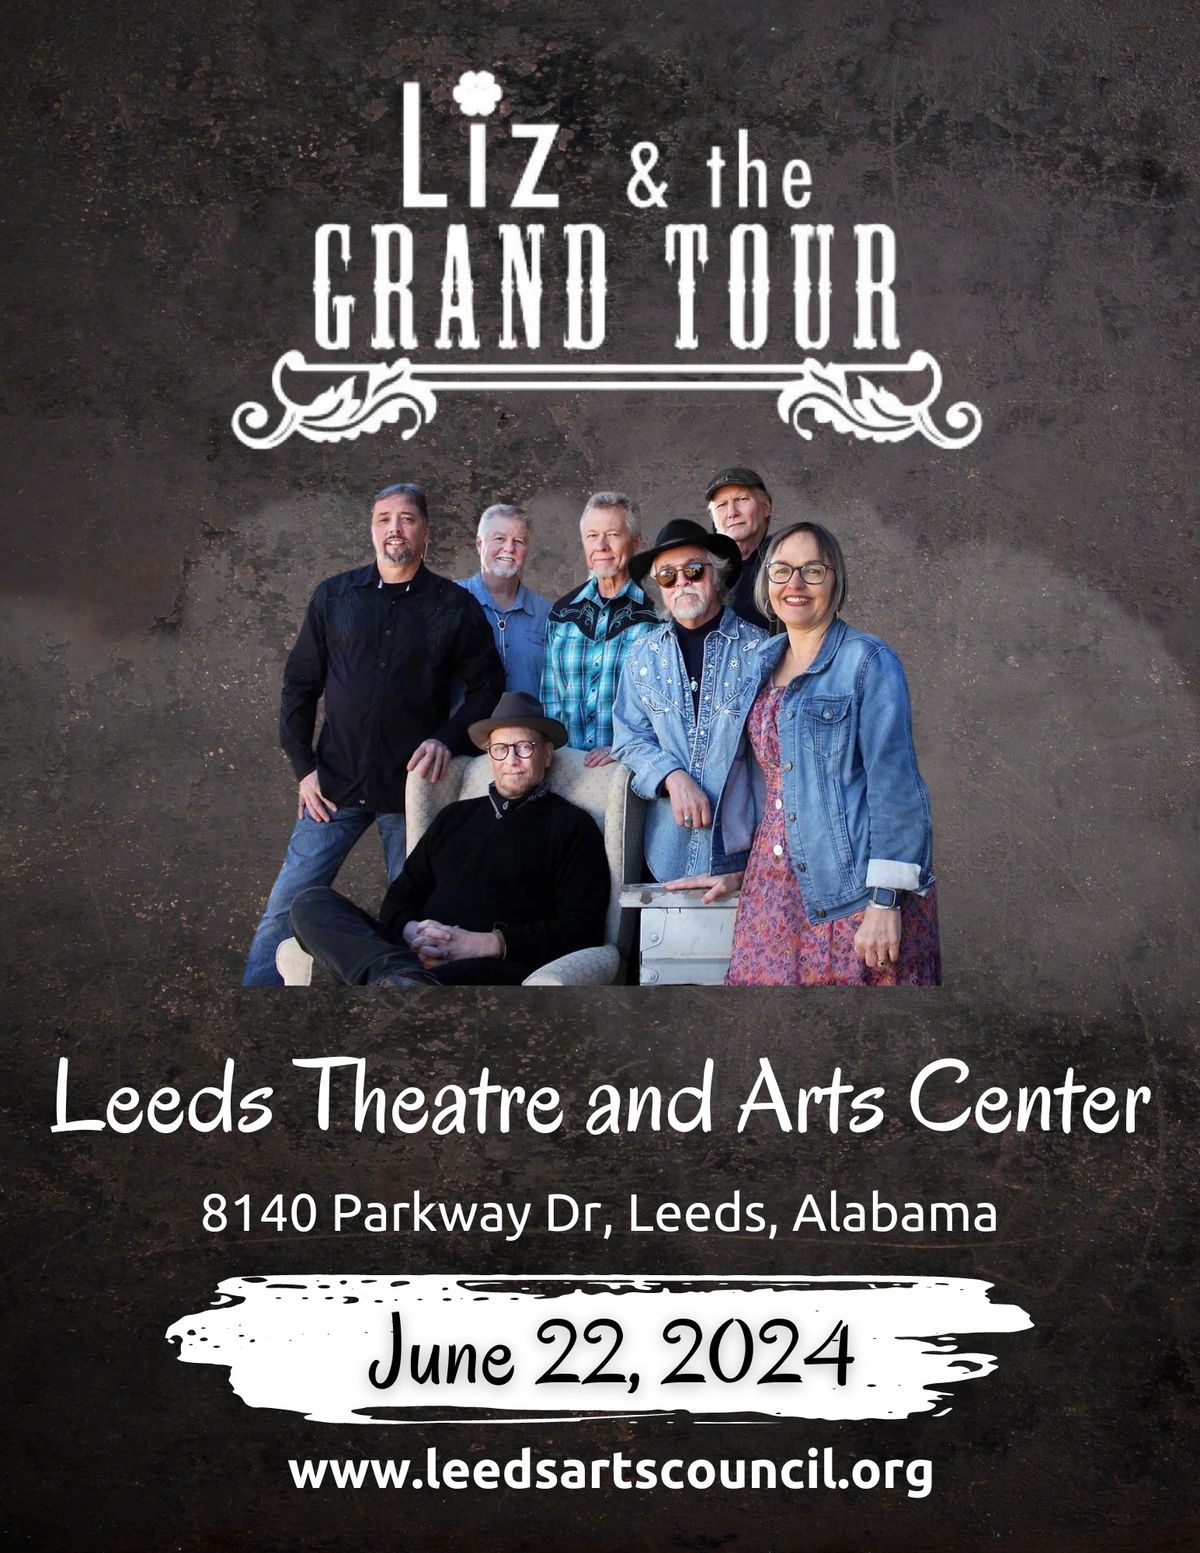 Liz and the Grand Tour at the Leeds Theatre & Arts Center